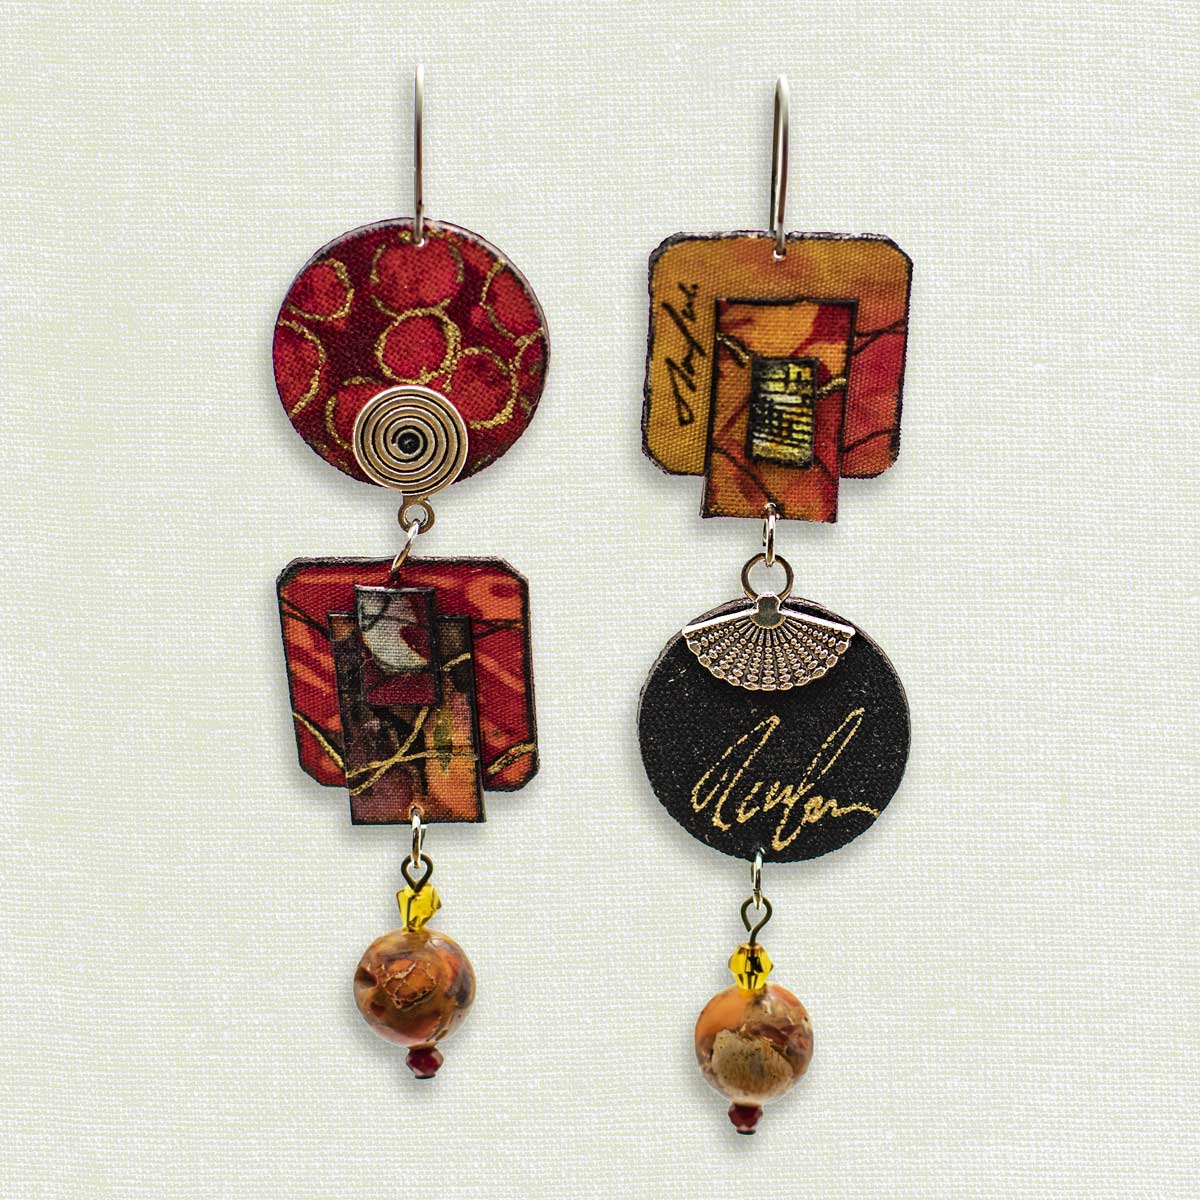 Asymmetric 3 tiered earrings, hand painted by artist Suzanne Bellows for SuzanneBellowsJewelry.com. This pair is part of the Earth Collection and features reds, black, silver and gold.